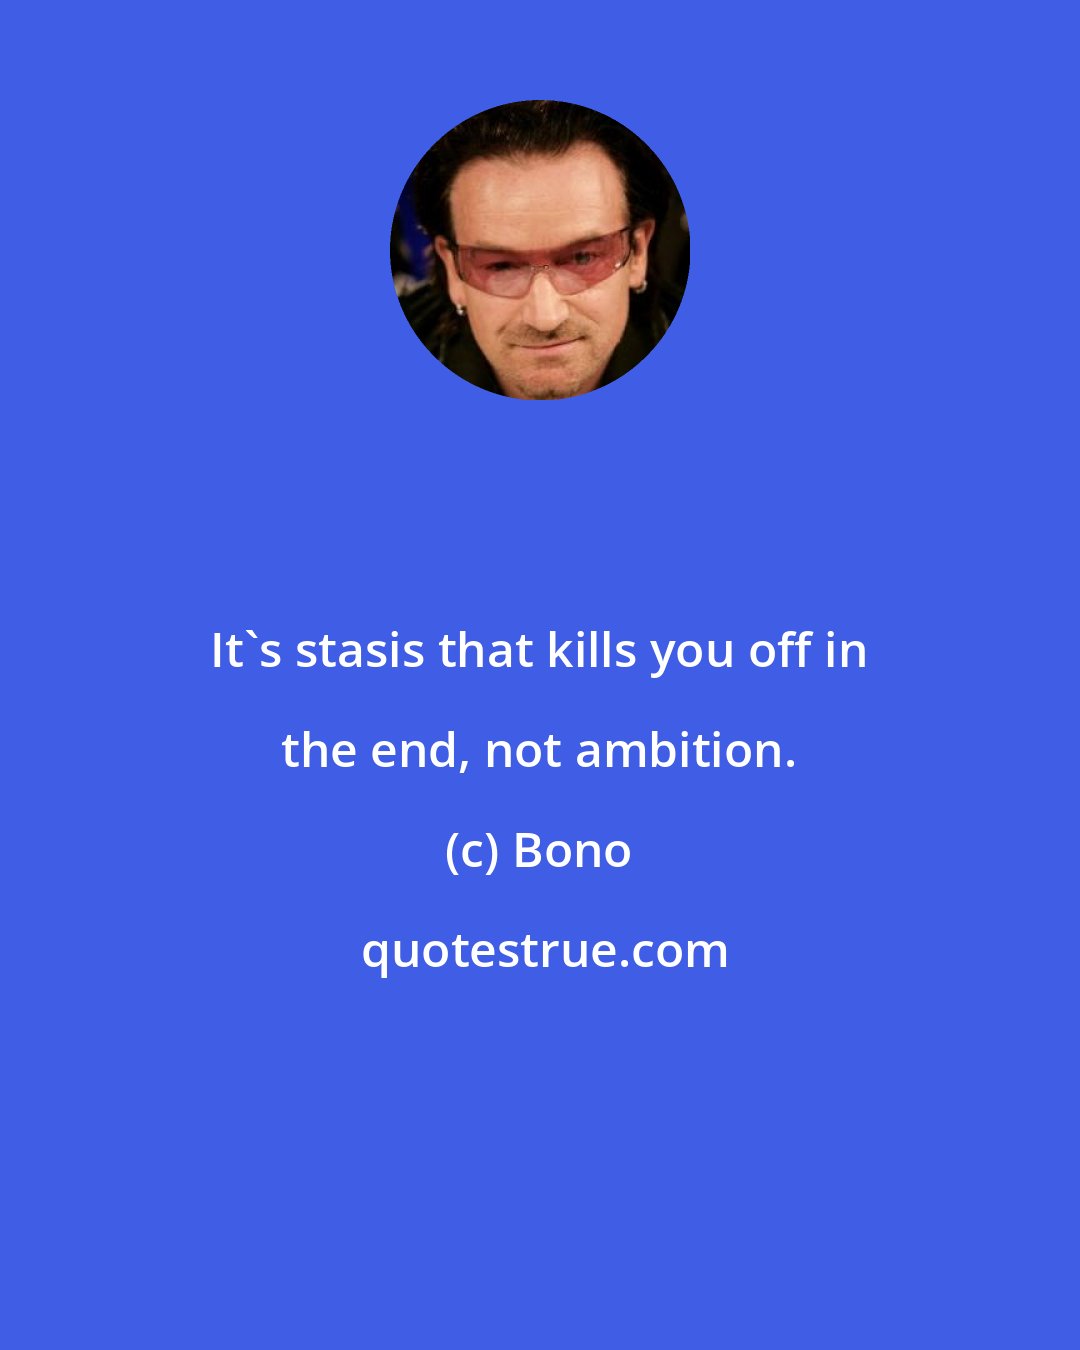 Bono: It's stasis that kills you off in the end, not ambition.